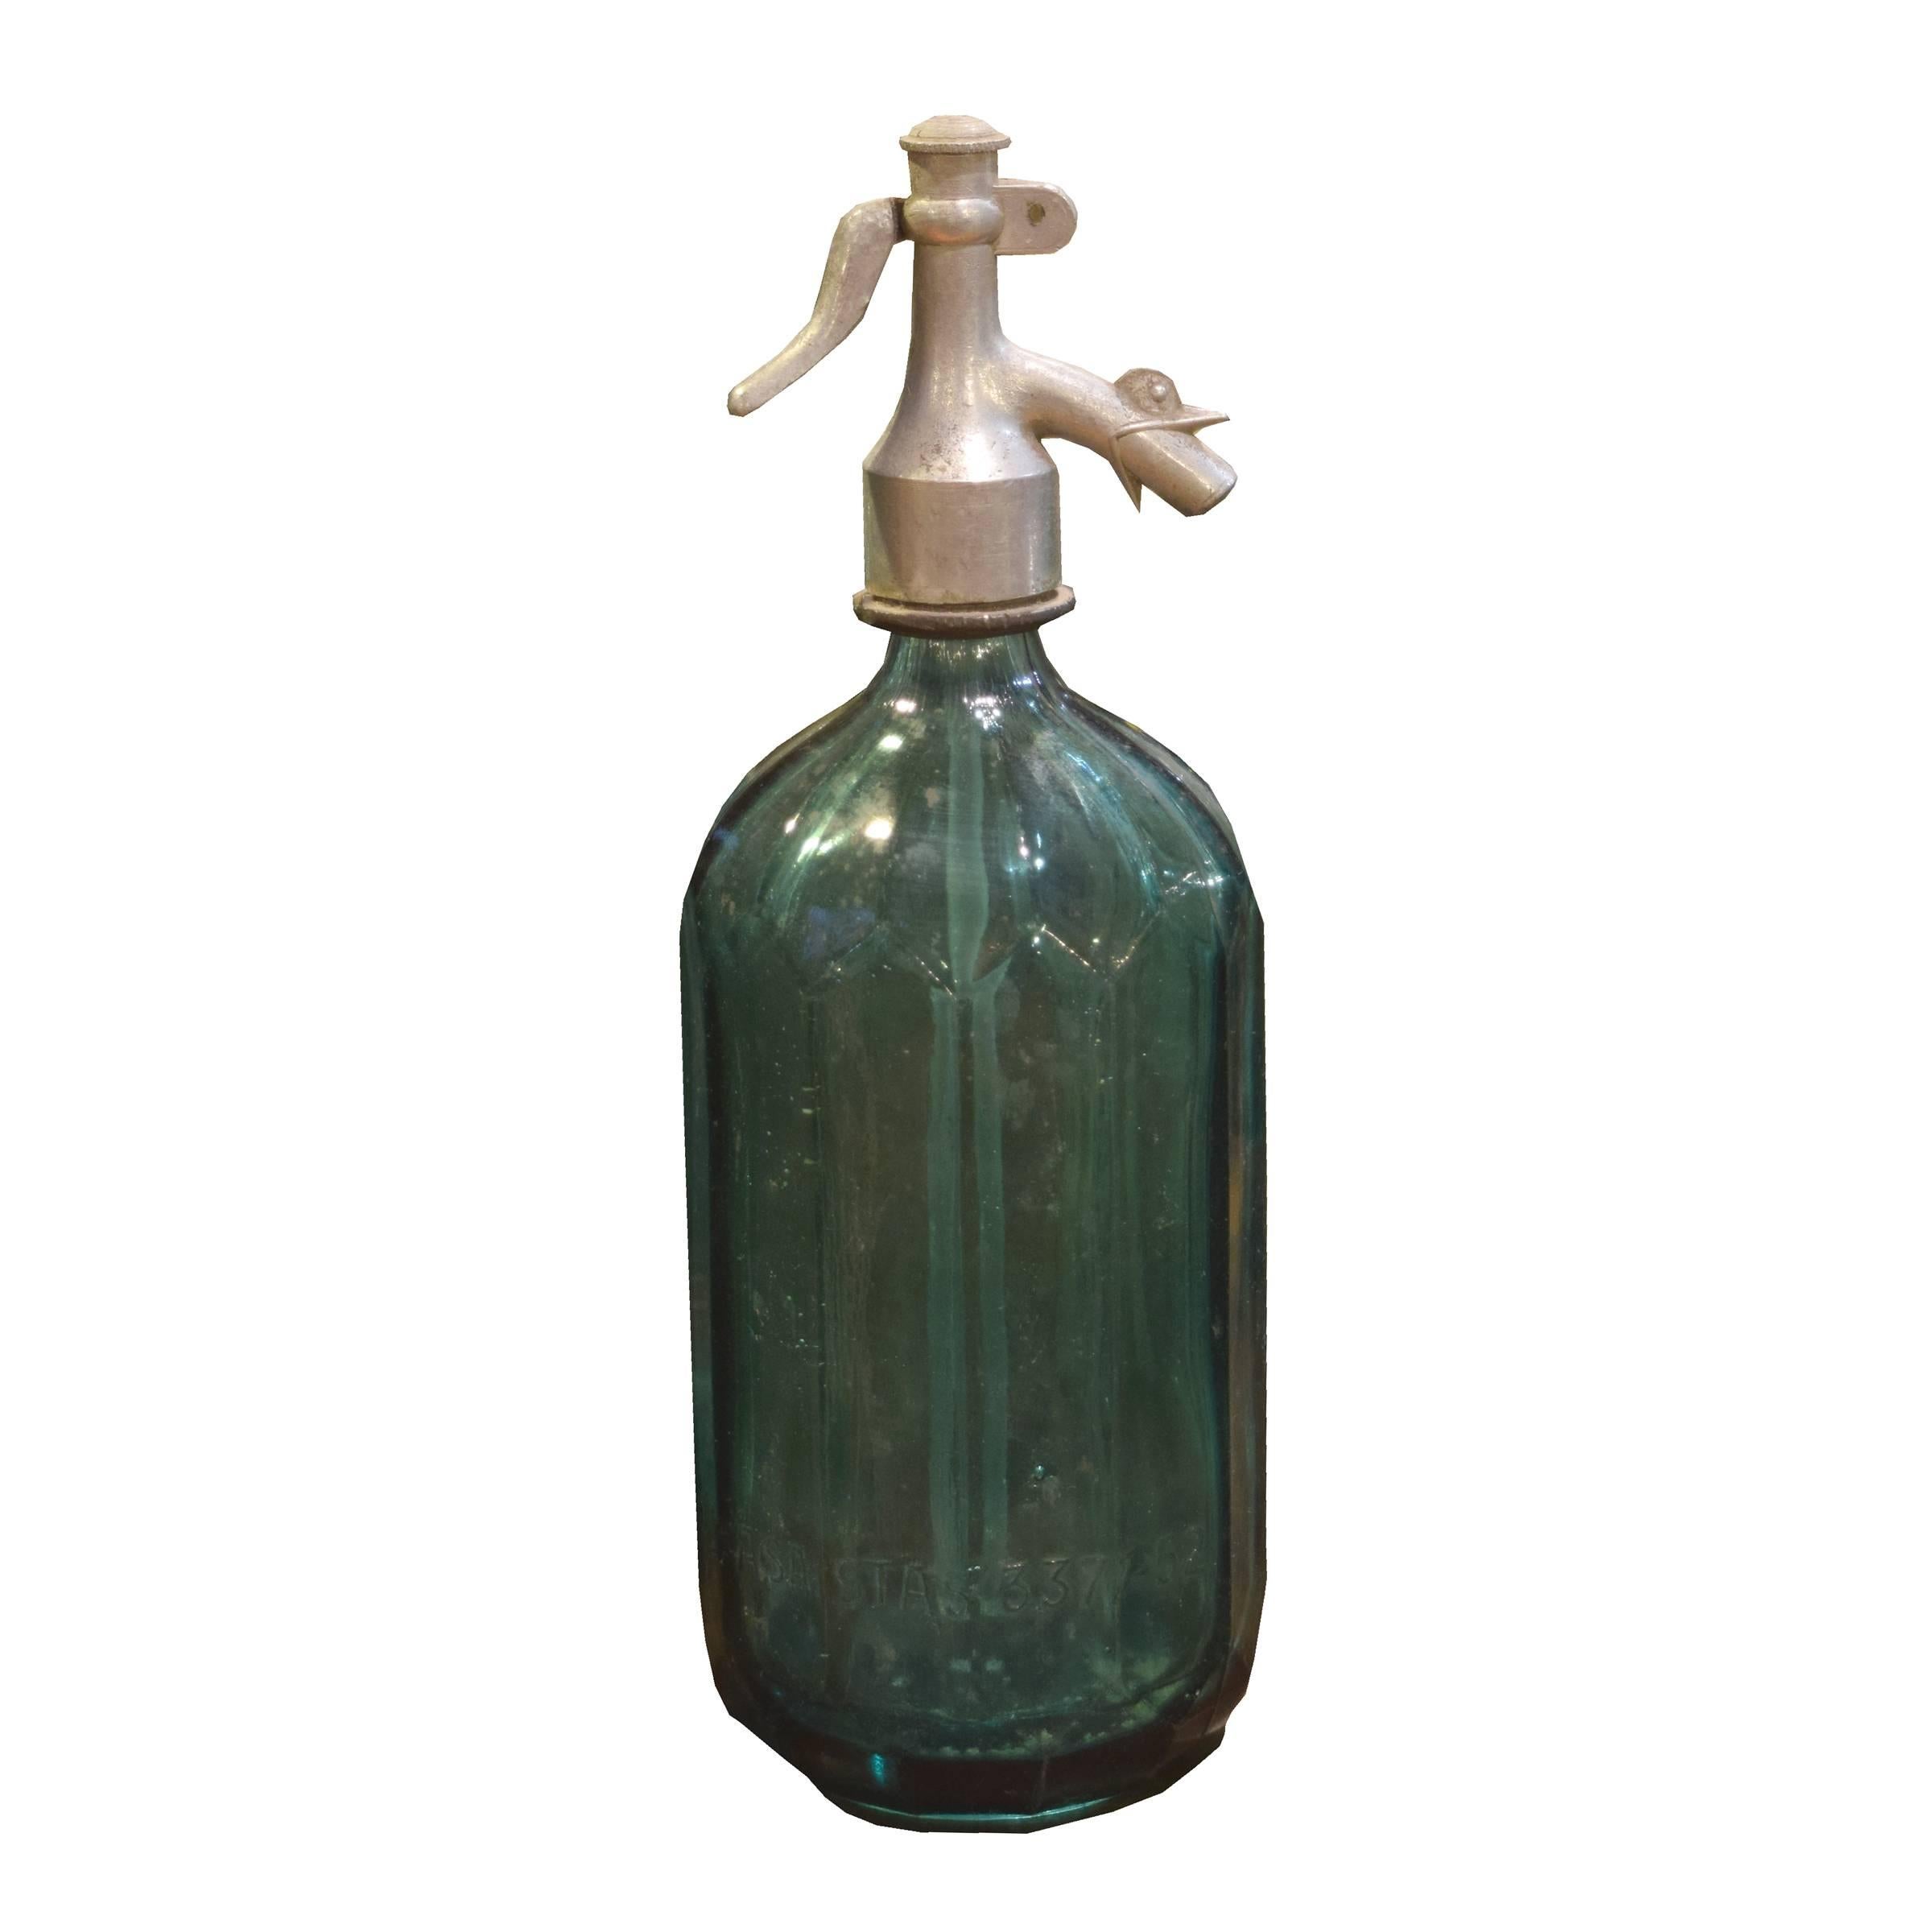 A very cool Italian faceted green glass seltzer bottle with a rooster head spout. Many available.